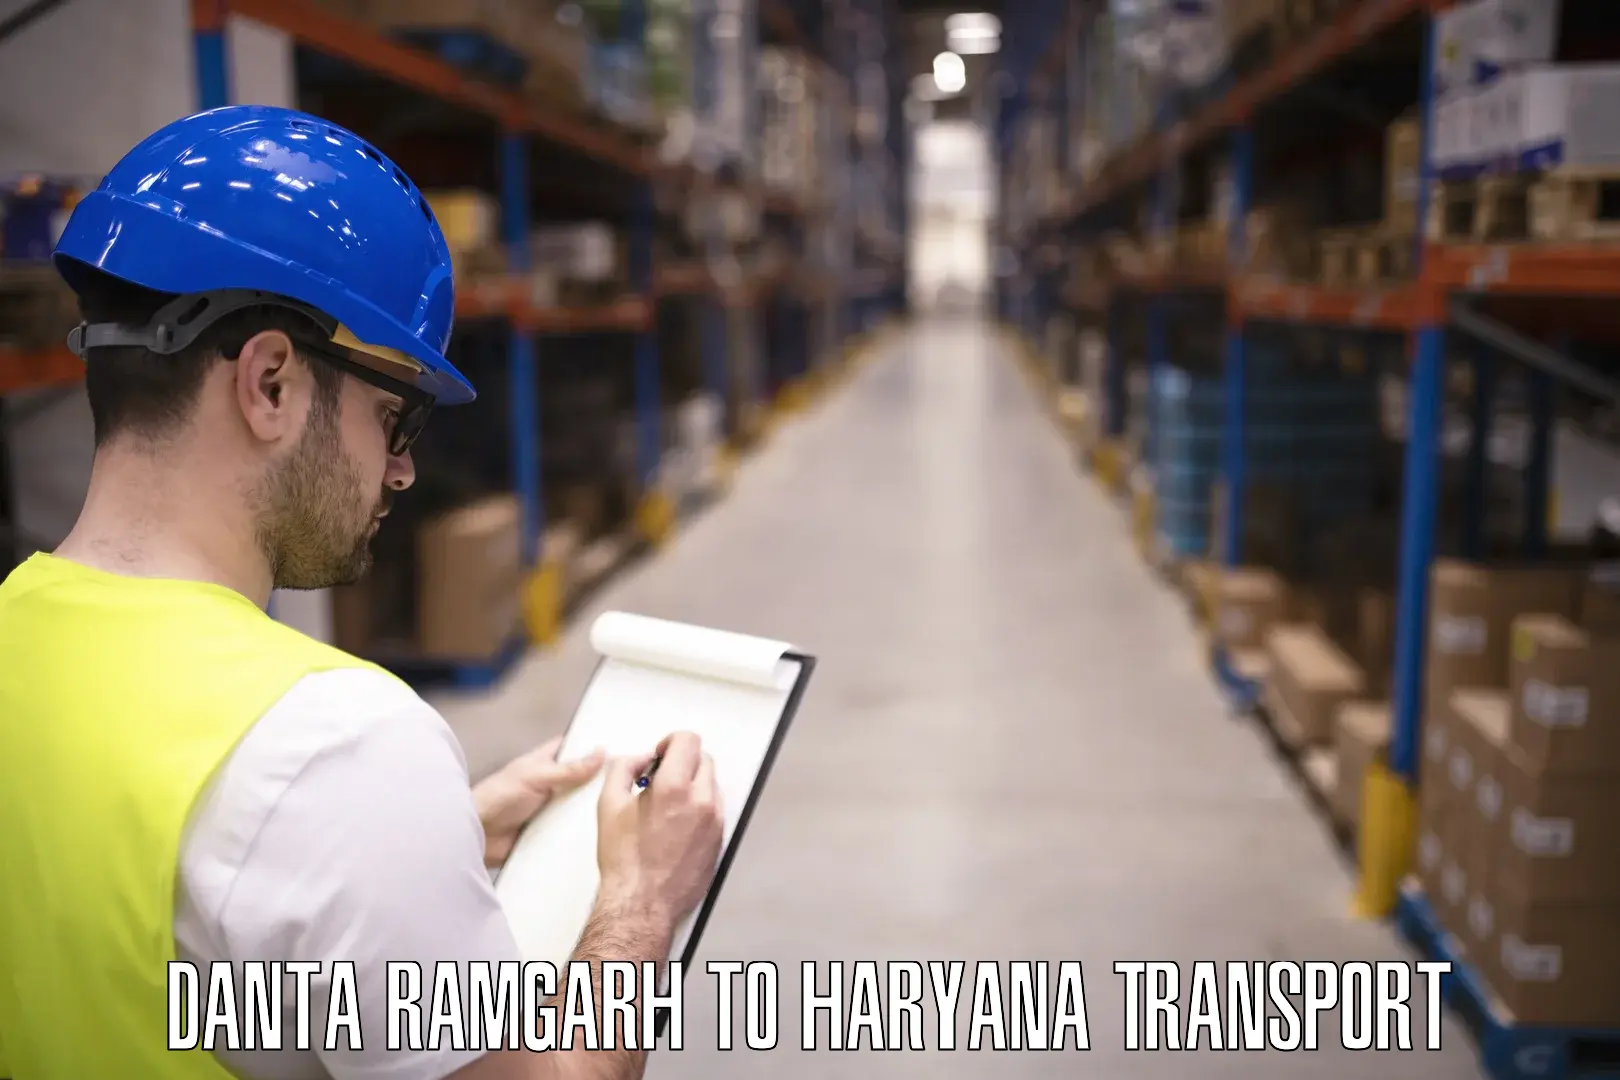 Container transport service Danta Ramgarh to Hodal